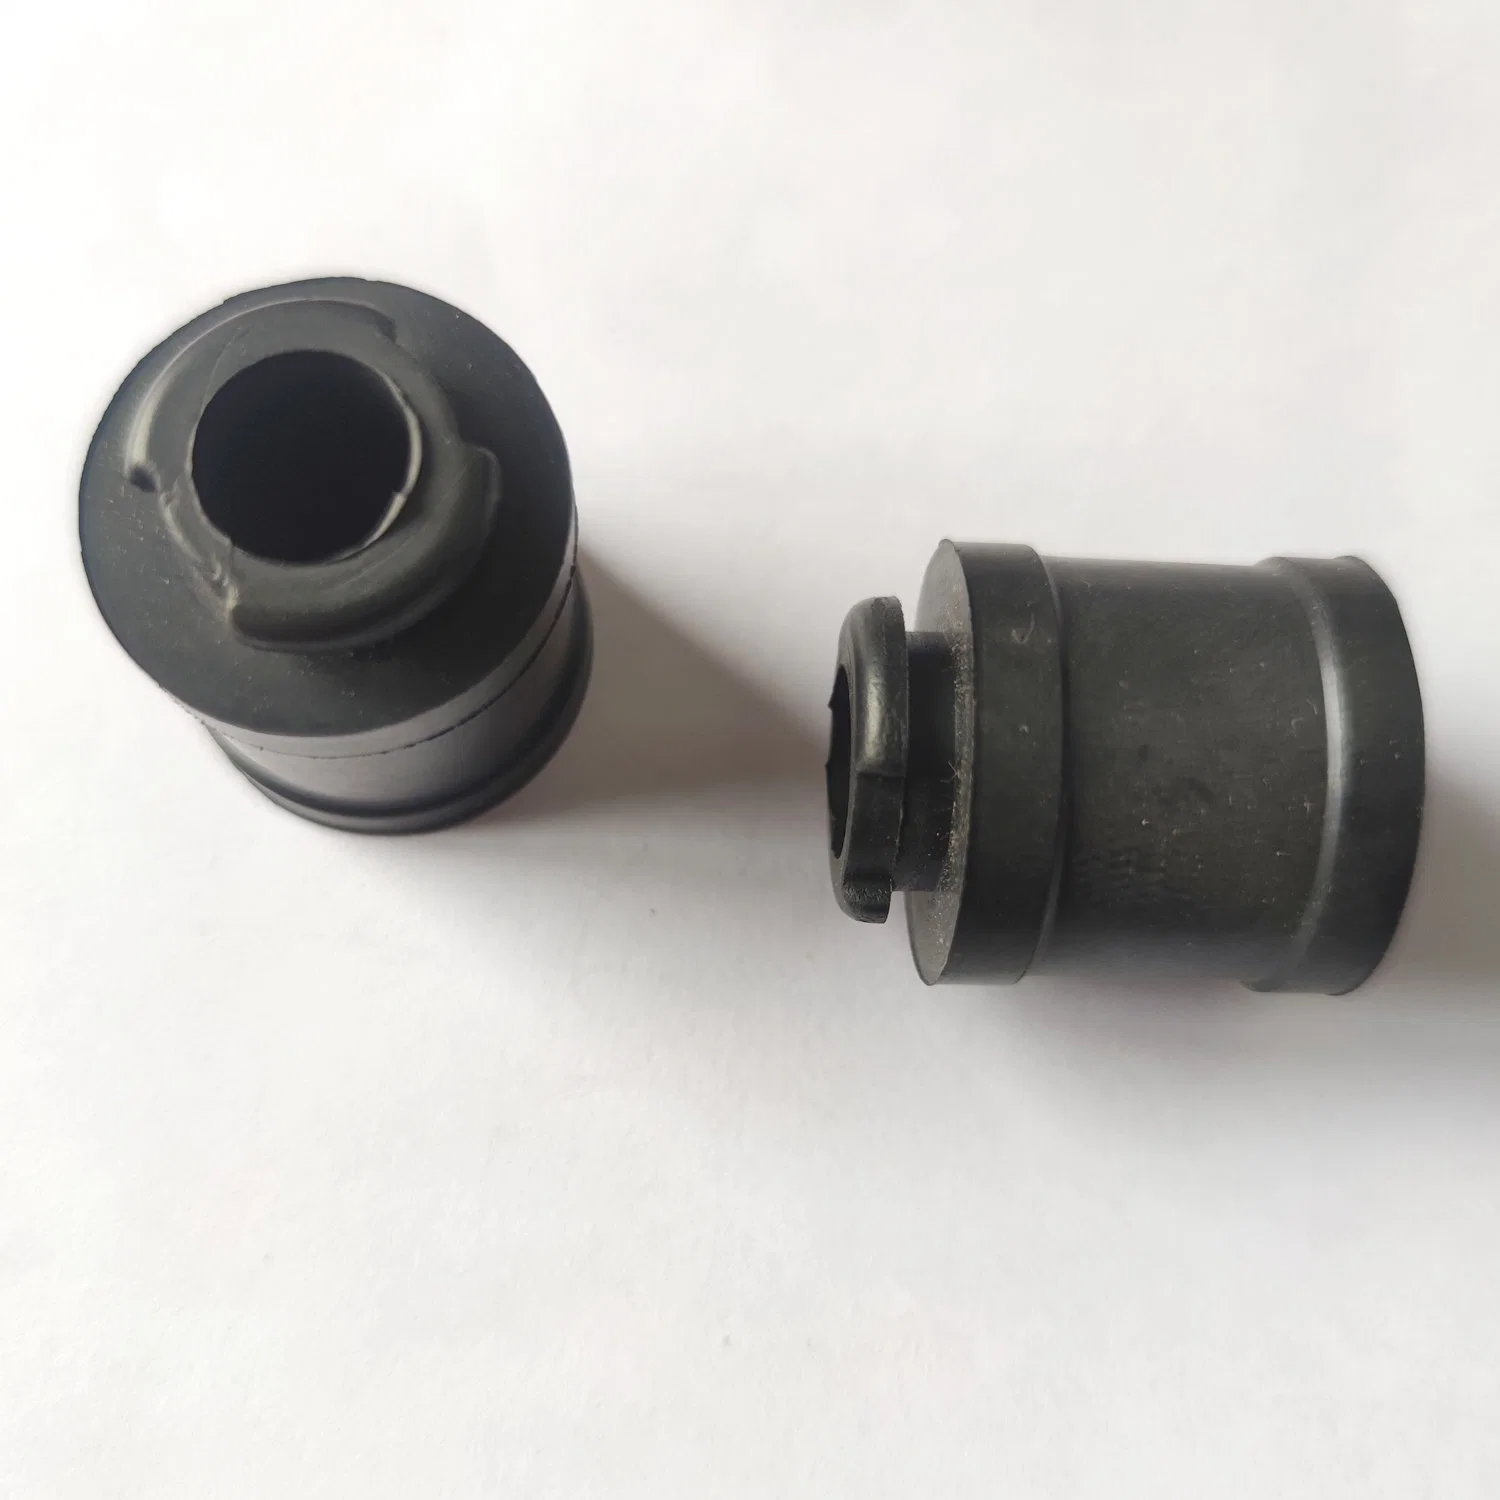 Compressor Engine Machining Repairing Maintenance Parts EPDM Rubber Copper Brass Thread OEM ODM Inserts Nut Bolt Maintaining Spare Parts